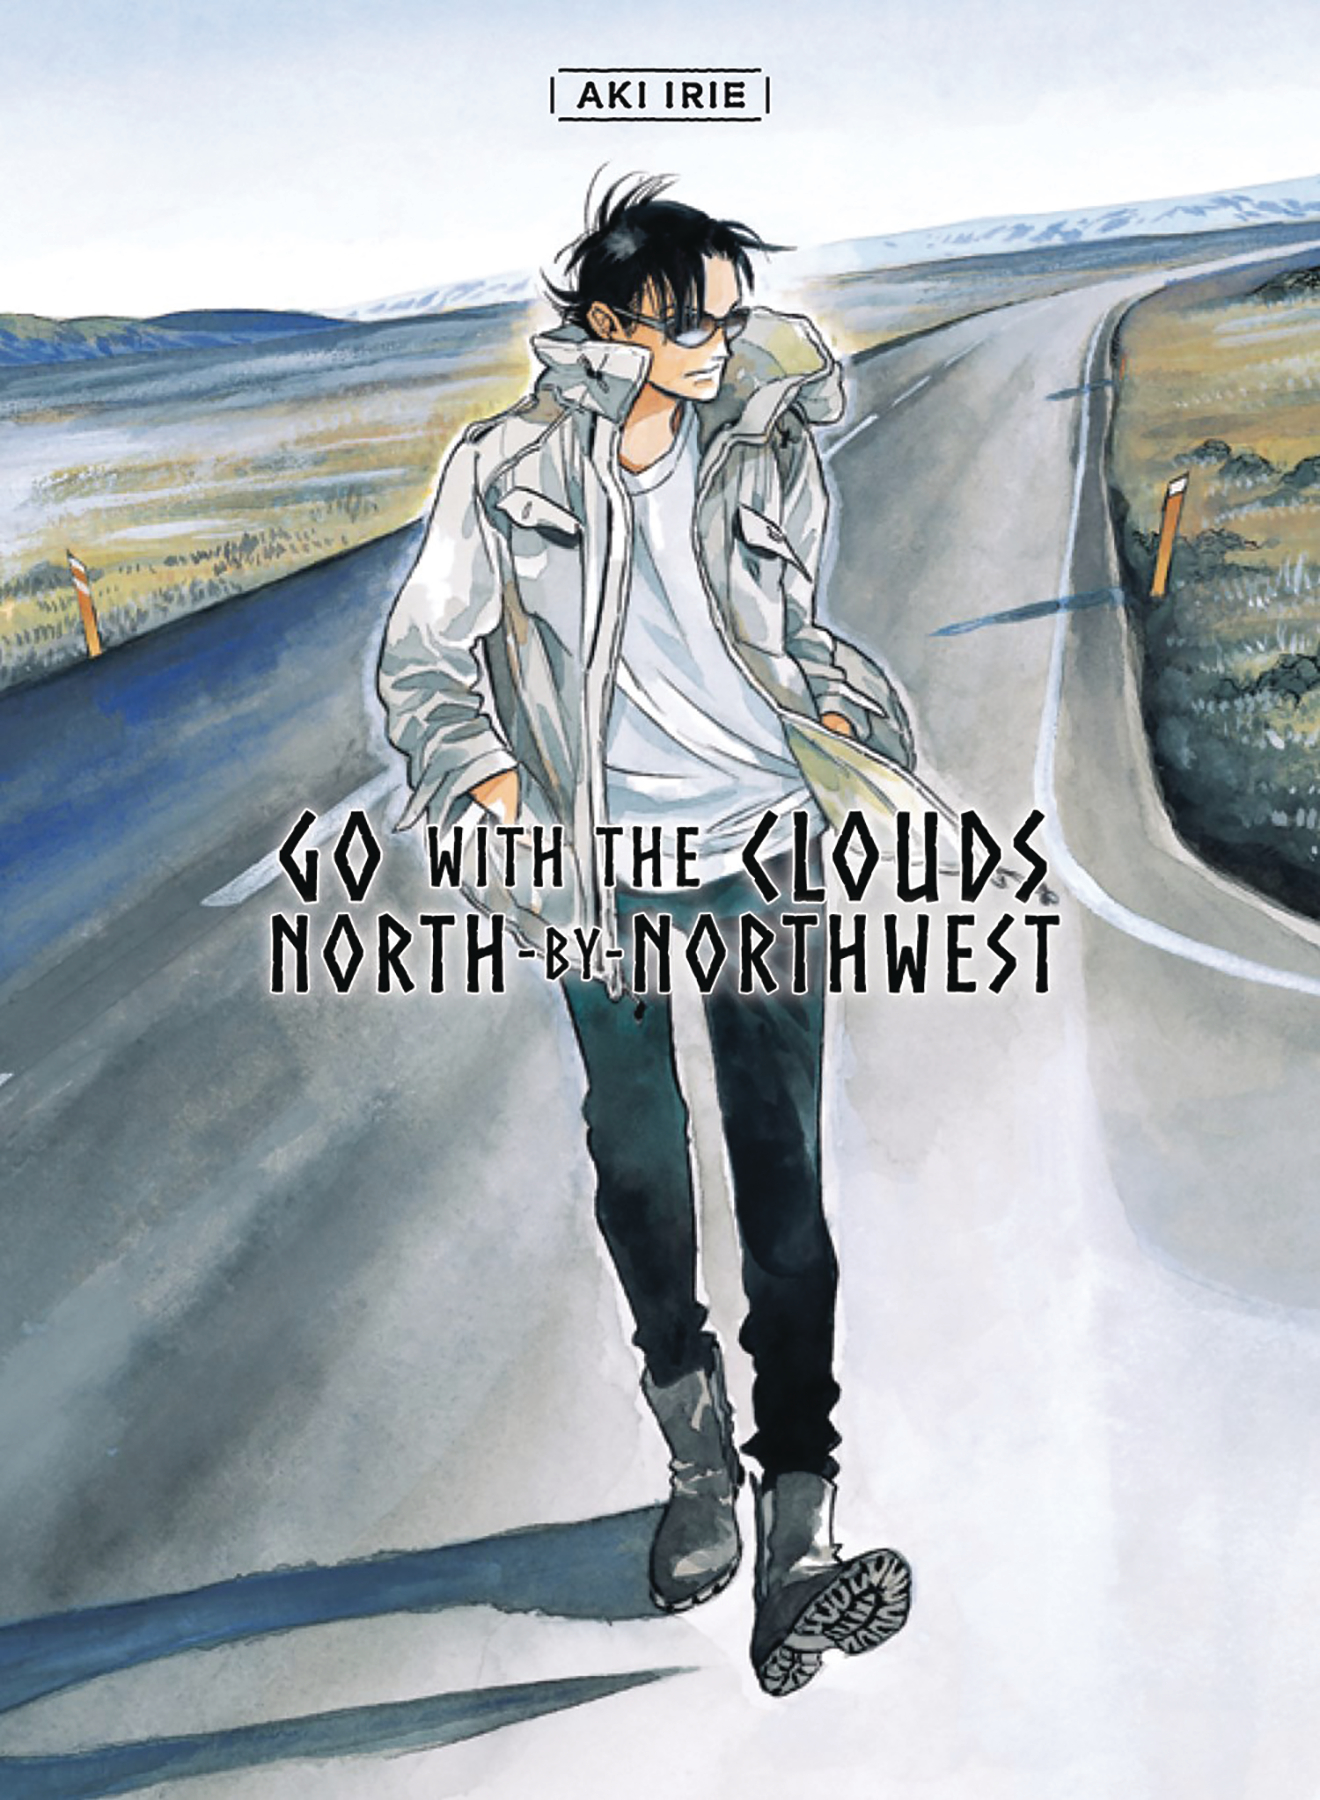 Go With the Clouds North by Northwest Manga Volume 5